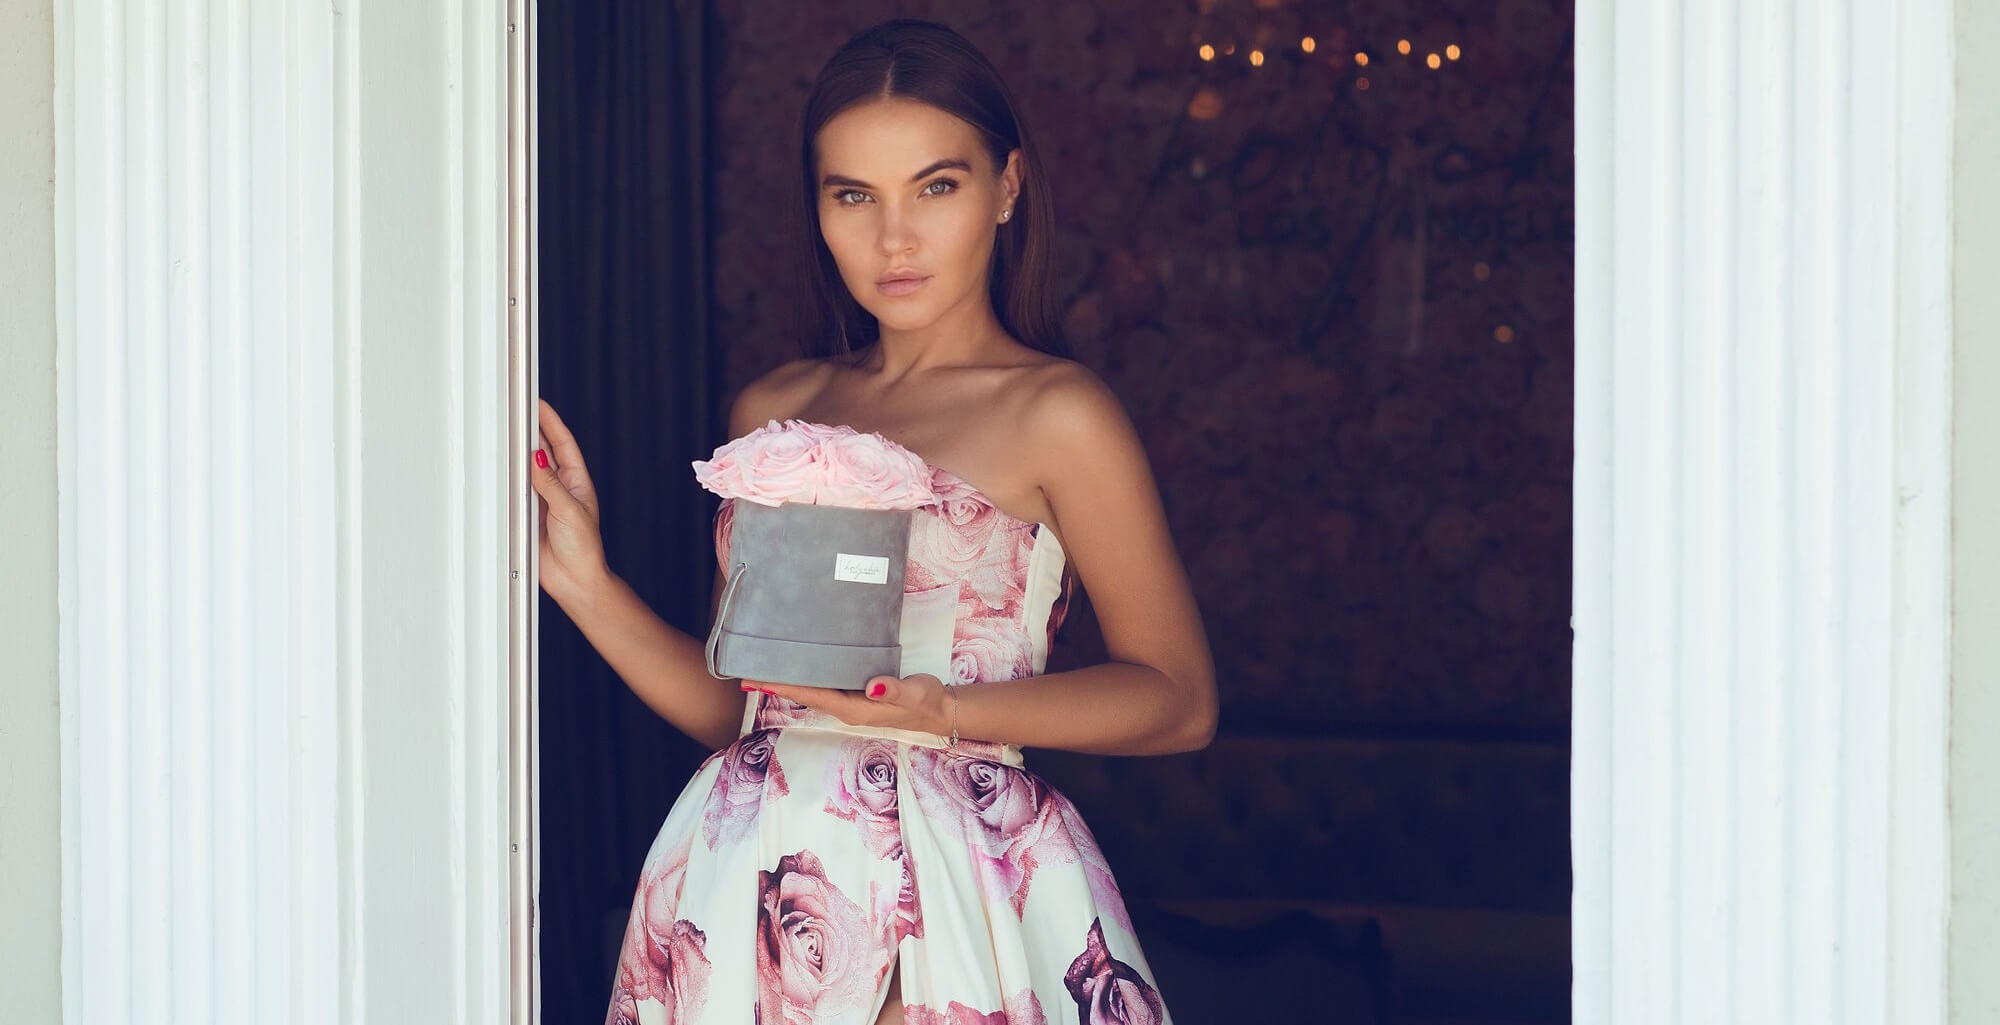 Girl in a dress holding a velvet round box with preserved roses in her hand